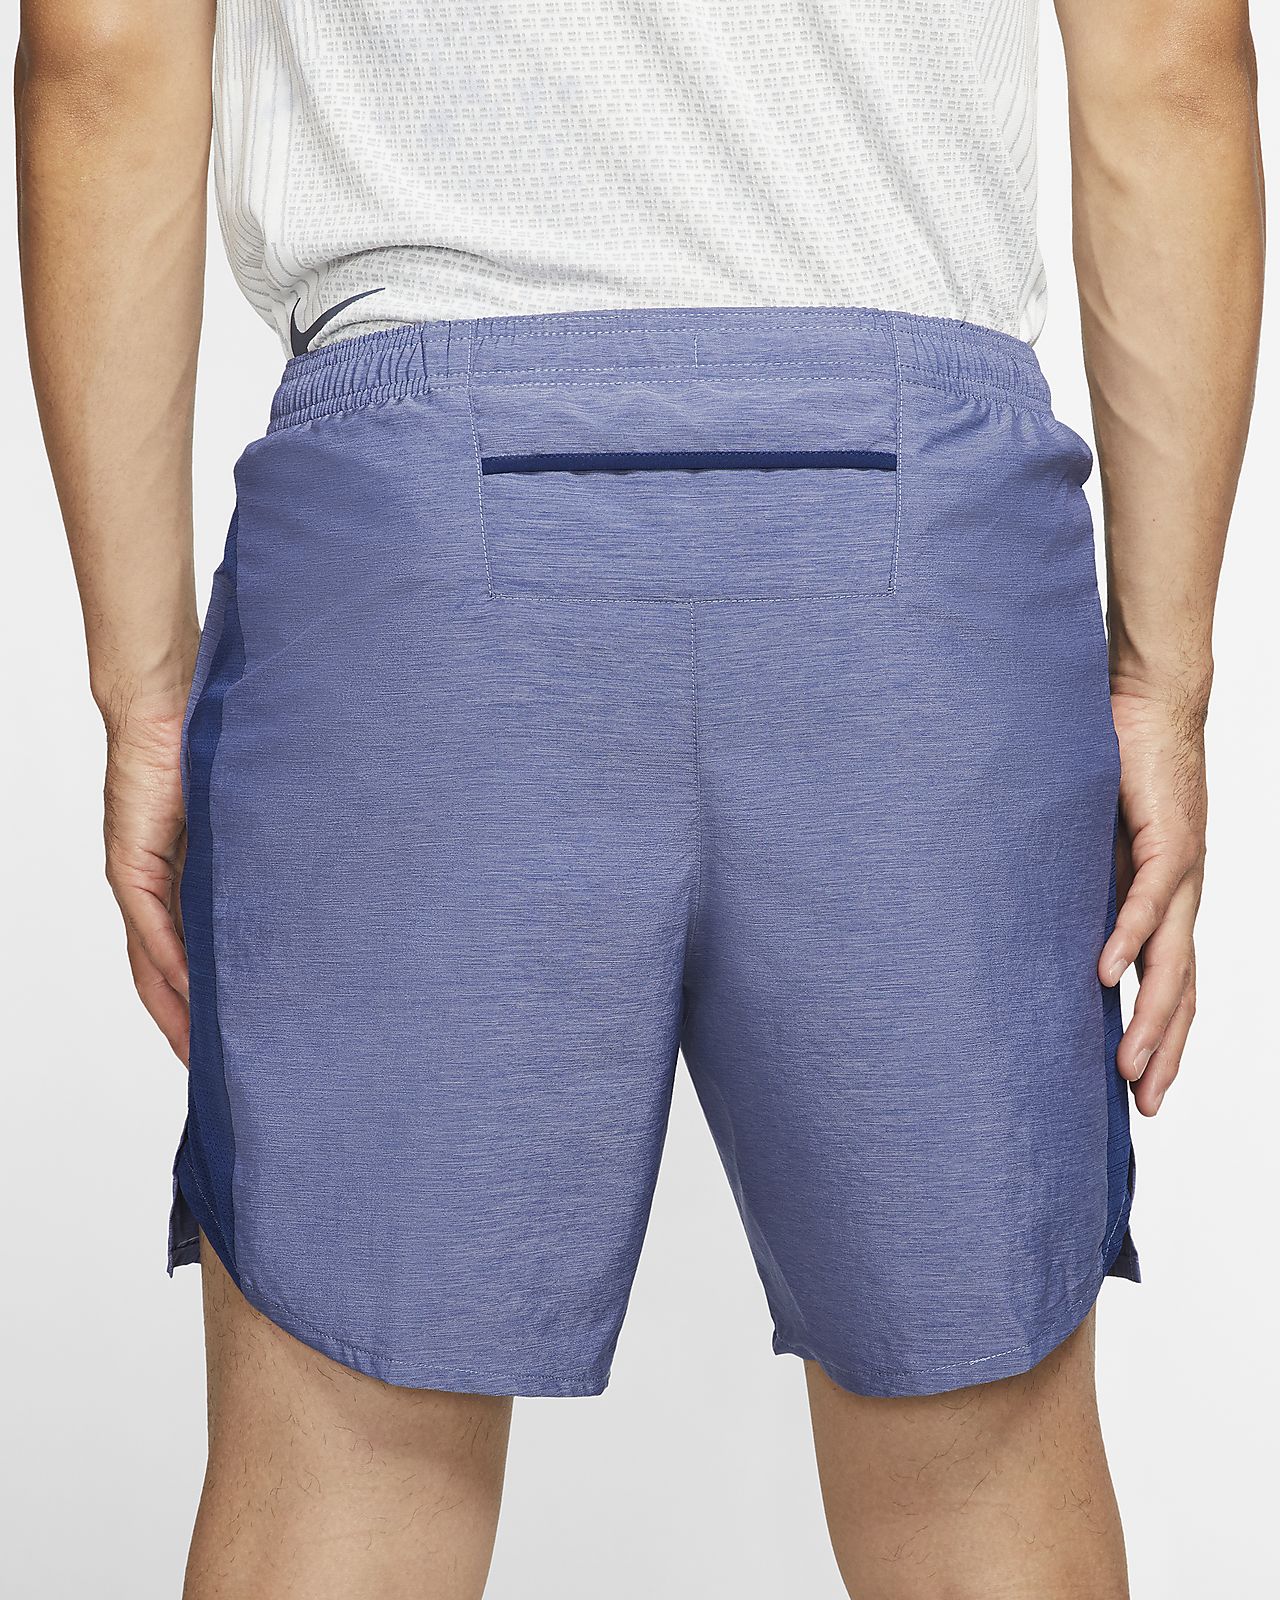 nike shorts with zipper in back